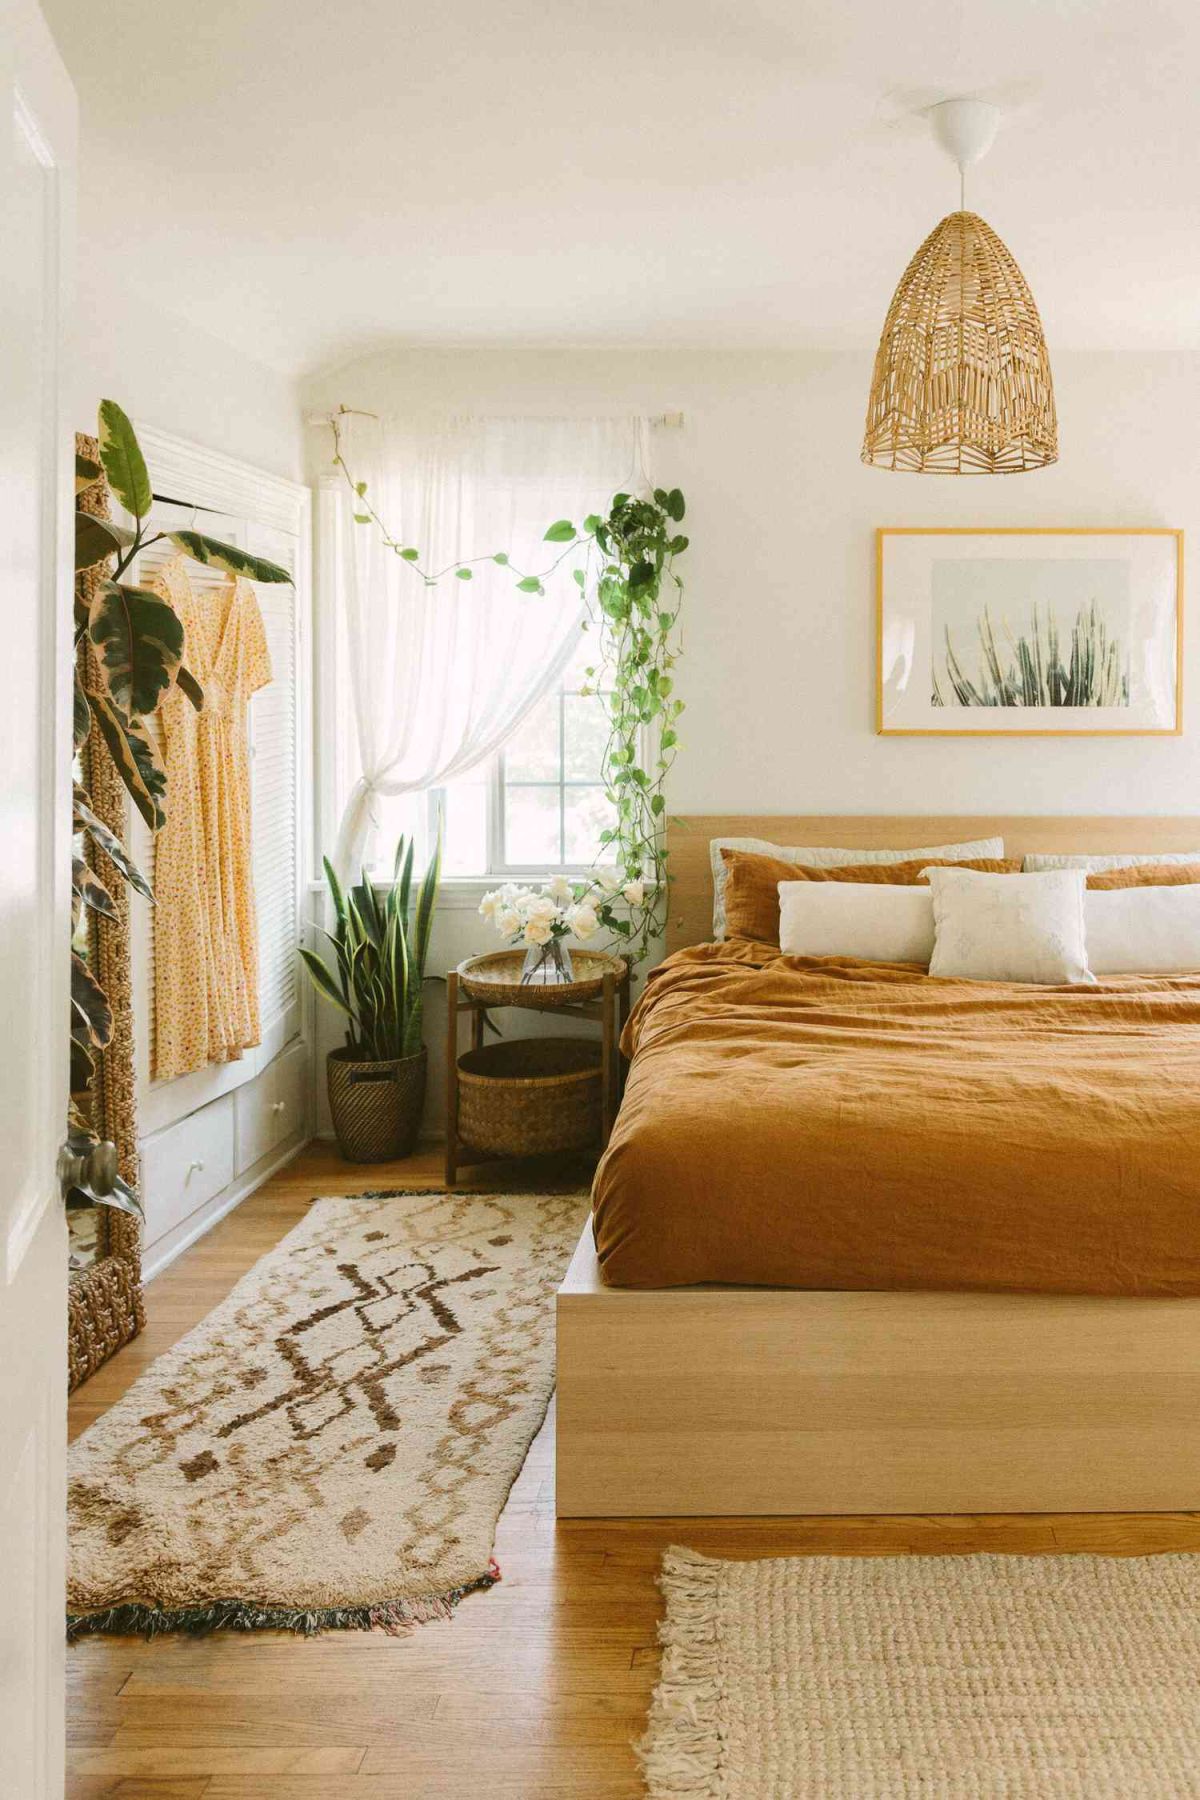 Boho-Style Bedrooms That Are Effortless and Eclectic